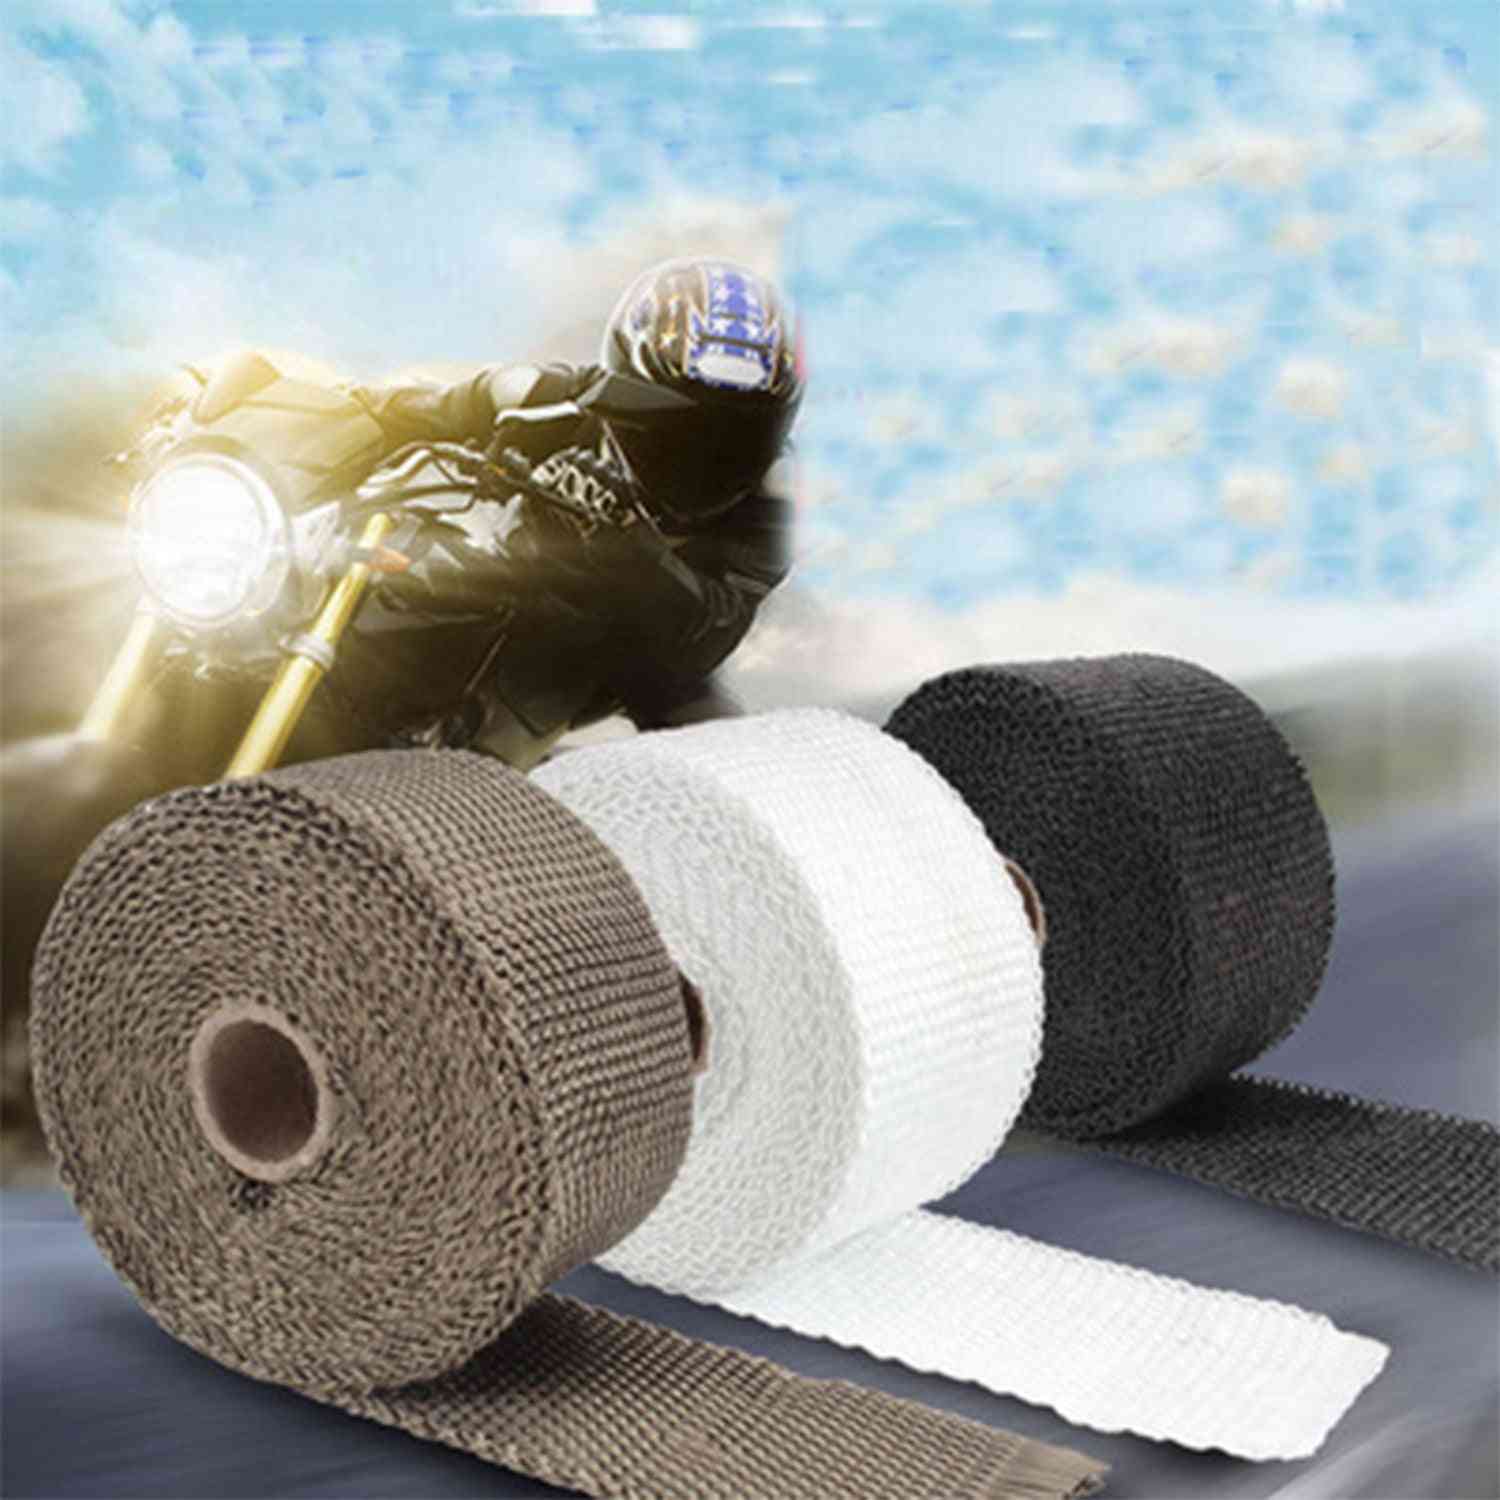 Car/motorcycle Thermal Exhaust Heat Tape Wrap Pipe Shields Manifold Header Insulation